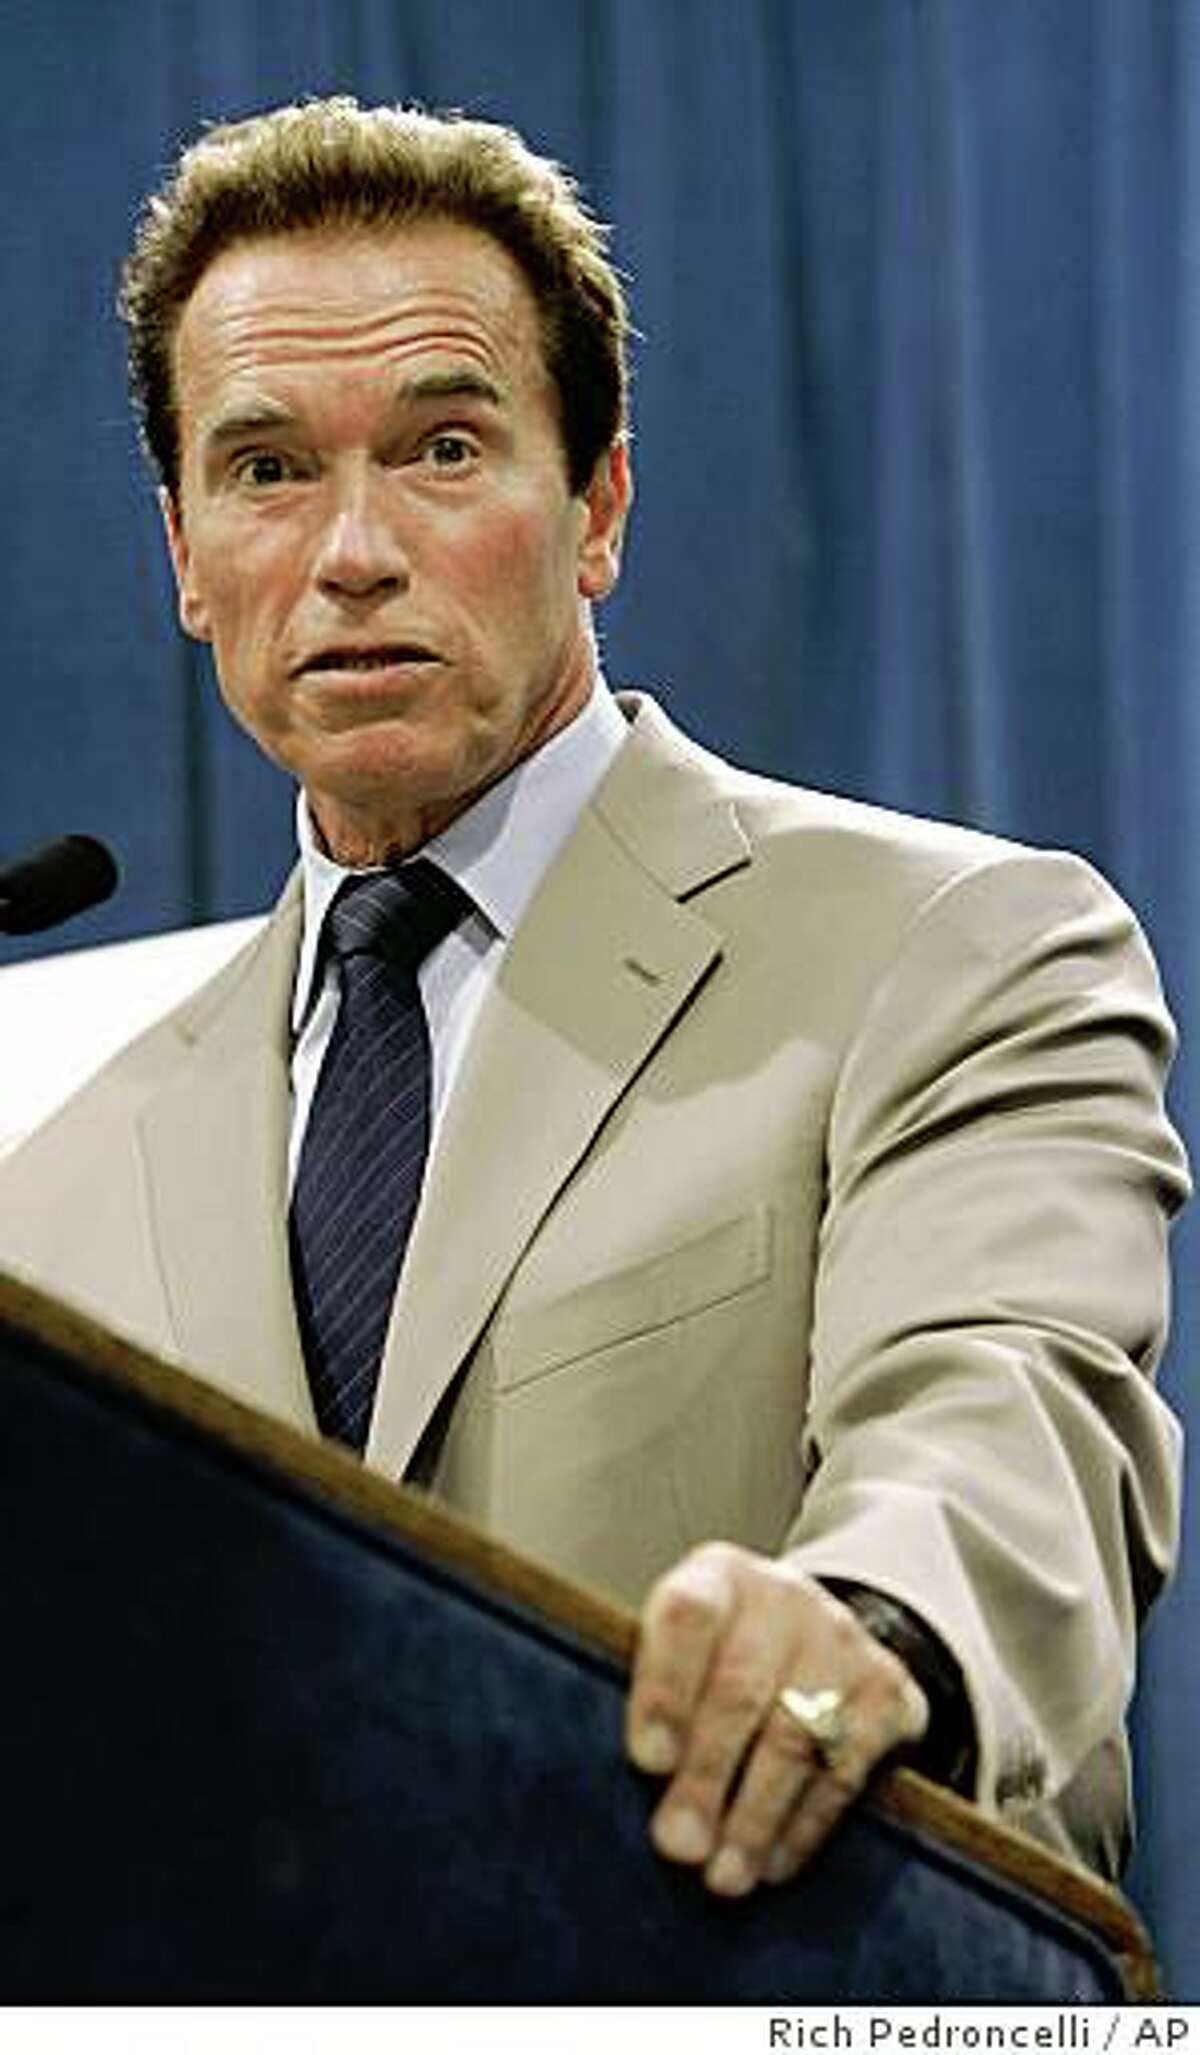 Gov. Arnold Schwarzenegger answers a question concerning the state's response to a magnitude-5.4 earthquake that struck the area earlier in the day, during a news conference in Sacramento, Calif., Tuesday, July 29, 2008. Schwarzenegger said the state was assessing levees, bridges, power lines, roads and hospitals but that no major damage had been reported. (AP Photo/Rich Pedroncelli)